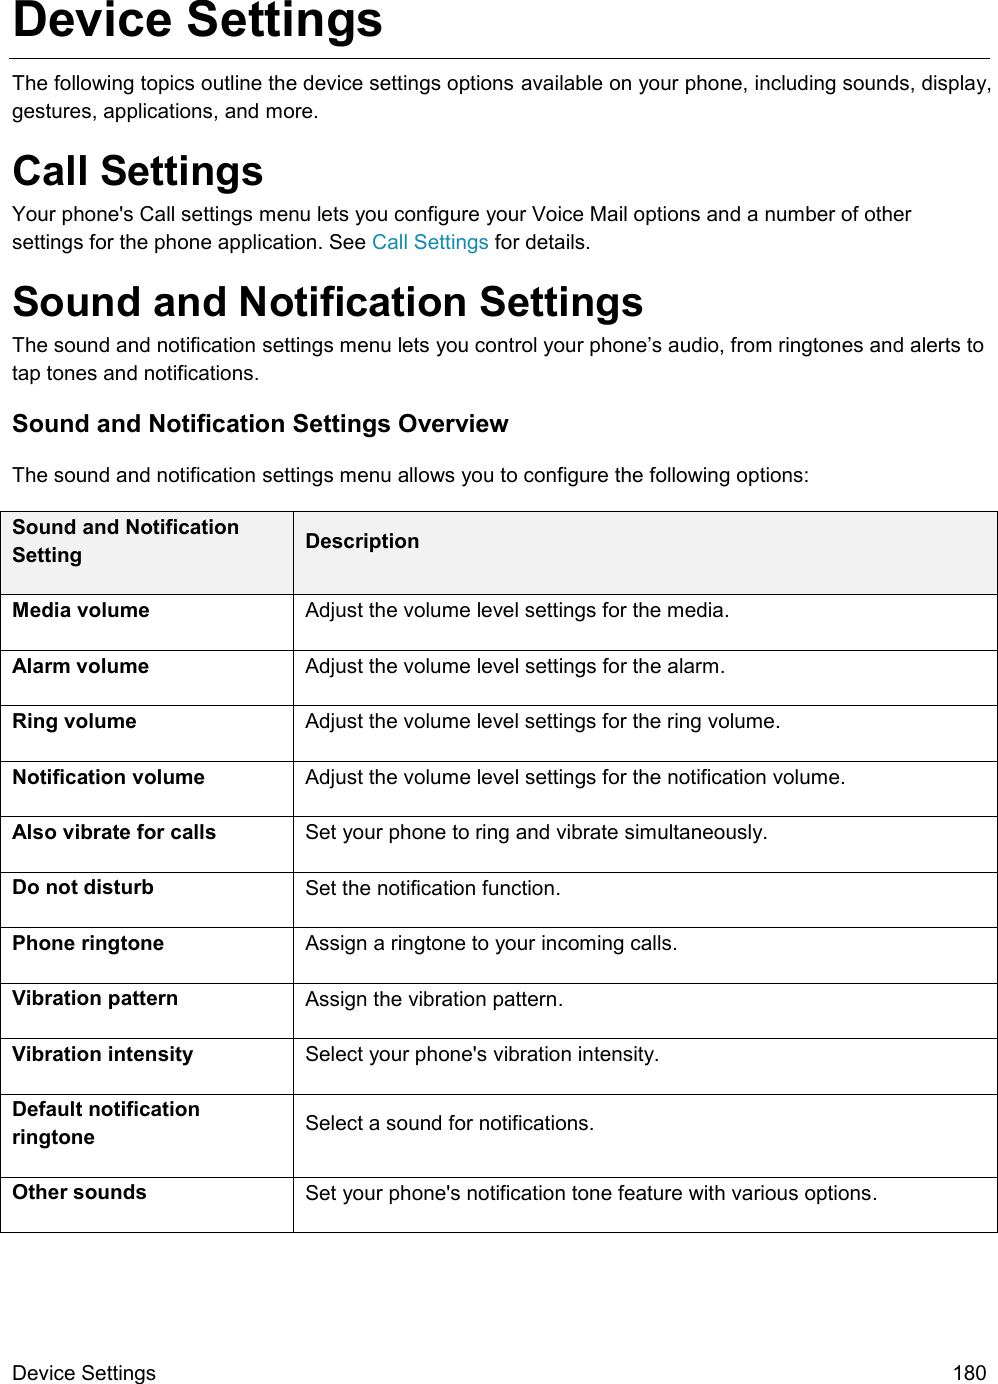  Device Settings  180 Device Settings The following topics outline the device settings options available on your phone, including sounds, display, gestures, applications, and more. Call Settings Your phone&apos;s Call settings menu lets you configure your Voice Mail options and a number of other settings for the phone application. See Call Settings for details. Sound and Notification Settings The sound and notification settings menu lets you control your phone’s audio, from ringtones and alerts to tap tones and notifications. Sound and Notification Settings Overview The sound and notification settings menu allows you to configure the following options: Sound and Notification Setting Description Media volume Adjust the volume level settings for the media. Alarm volume Adjust the volume level settings for the alarm. Ring volume Adjust the volume level settings for the ring volume. Notification volume Adjust the volume level settings for the notification volume. Also vibrate for calls Set your phone to ring and vibrate simultaneously. Do not disturb Set the notification function. Phone ringtone  Assign a ringtone to your incoming calls. Vibration pattern Assign the vibration pattern. Vibration intensity Select your phone&apos;s vibration intensity. Default notification ringtone Select a sound for notifications. Other sounds Set your phone&apos;s notification tone feature with various options.  